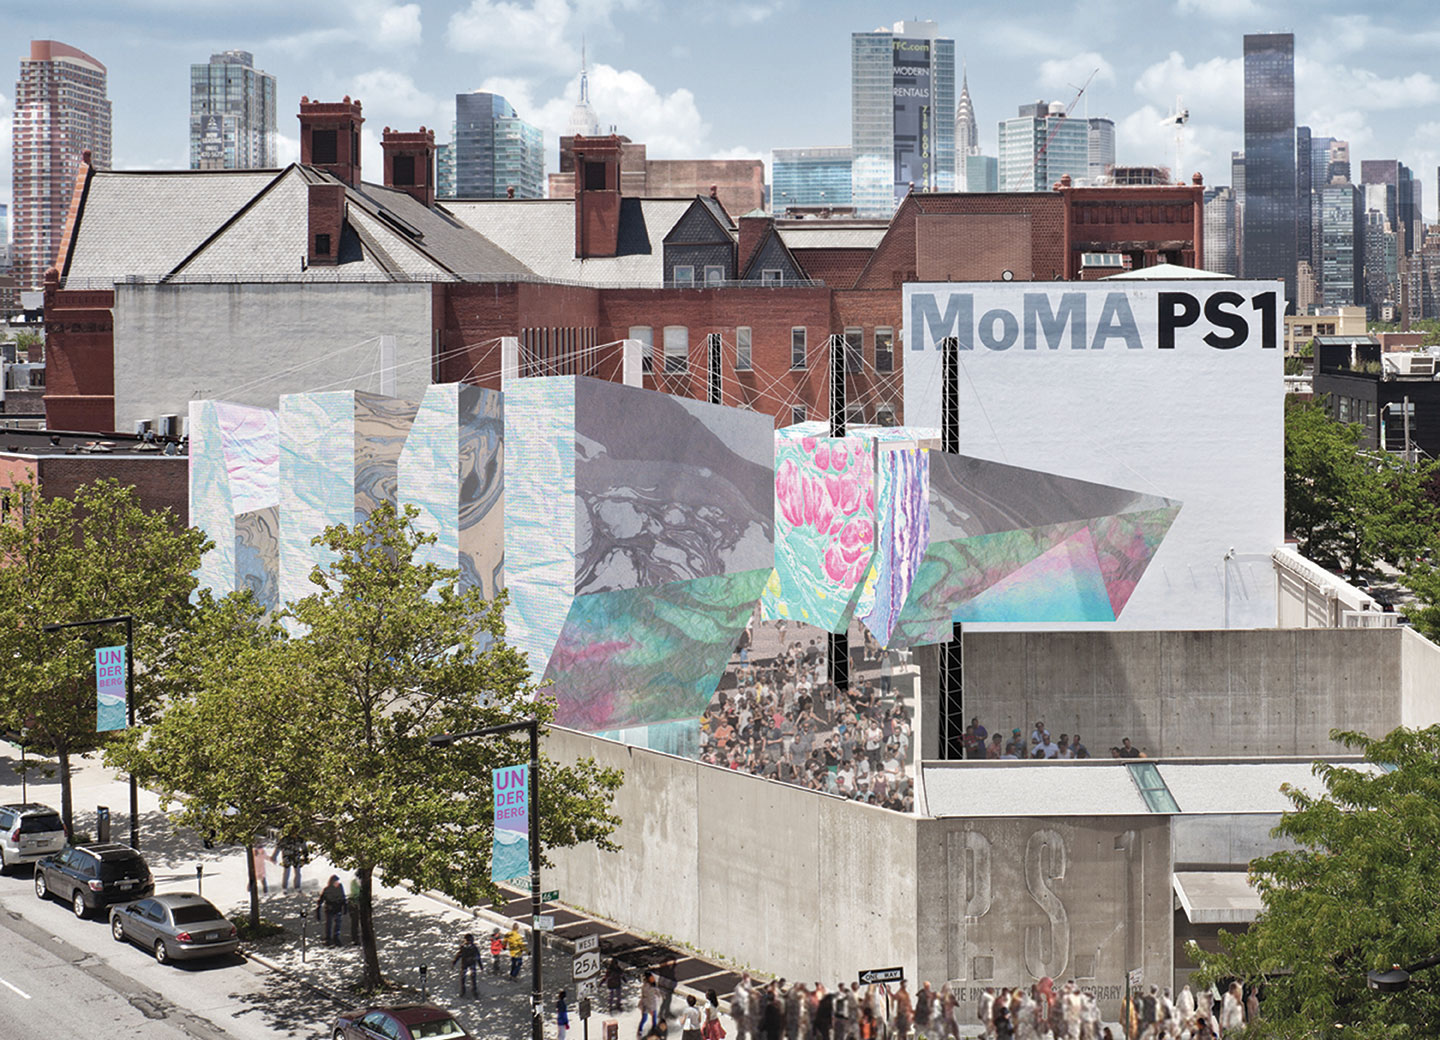 Lee and Macgillivray's MoMA PS1 entry Underberg